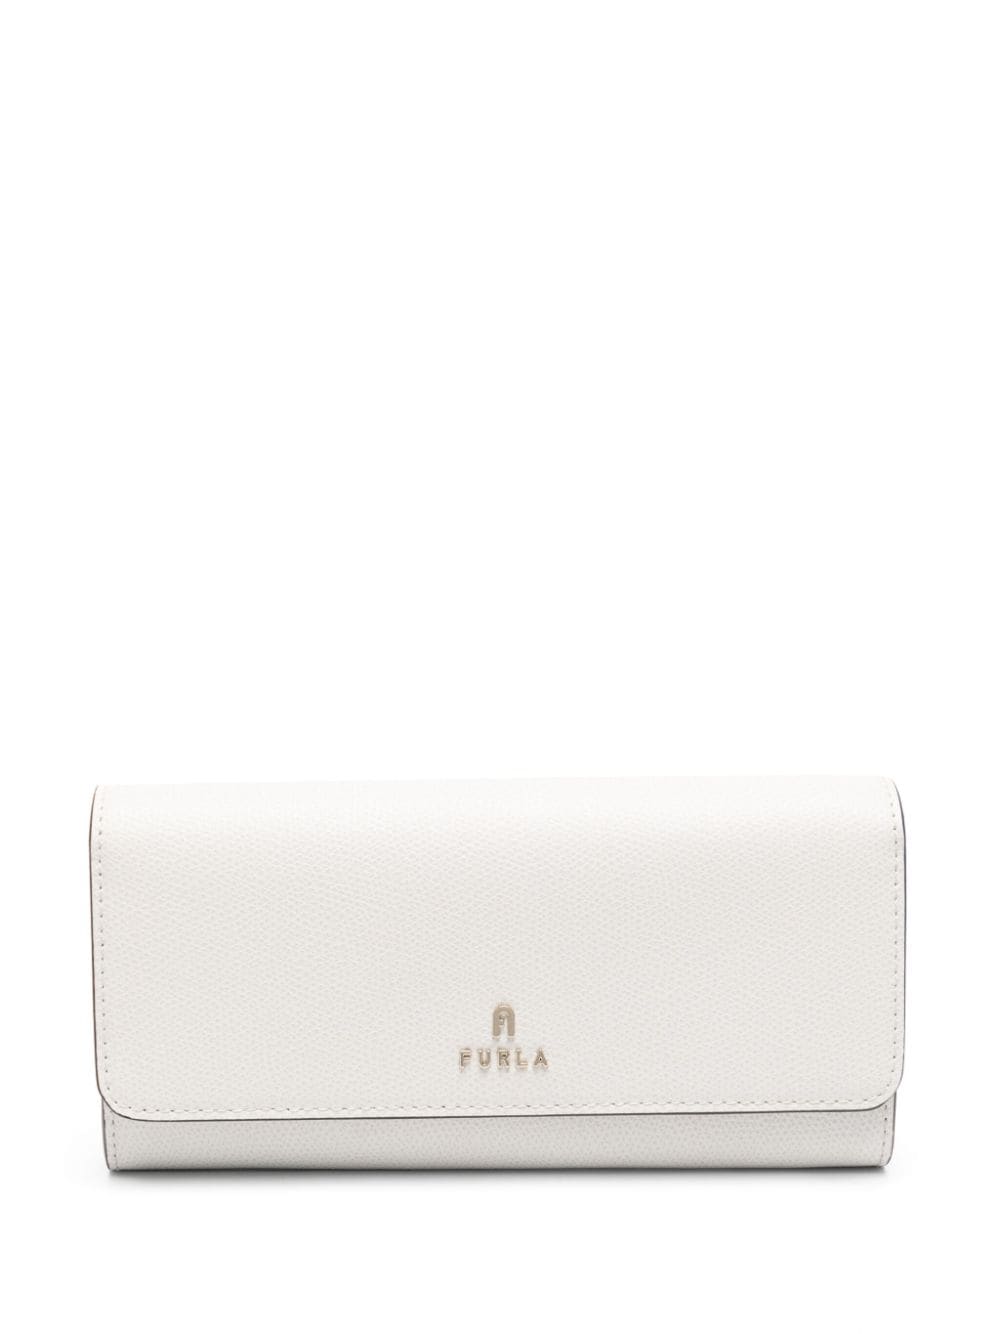 Furla Camelia Continental Leather Wallet In White